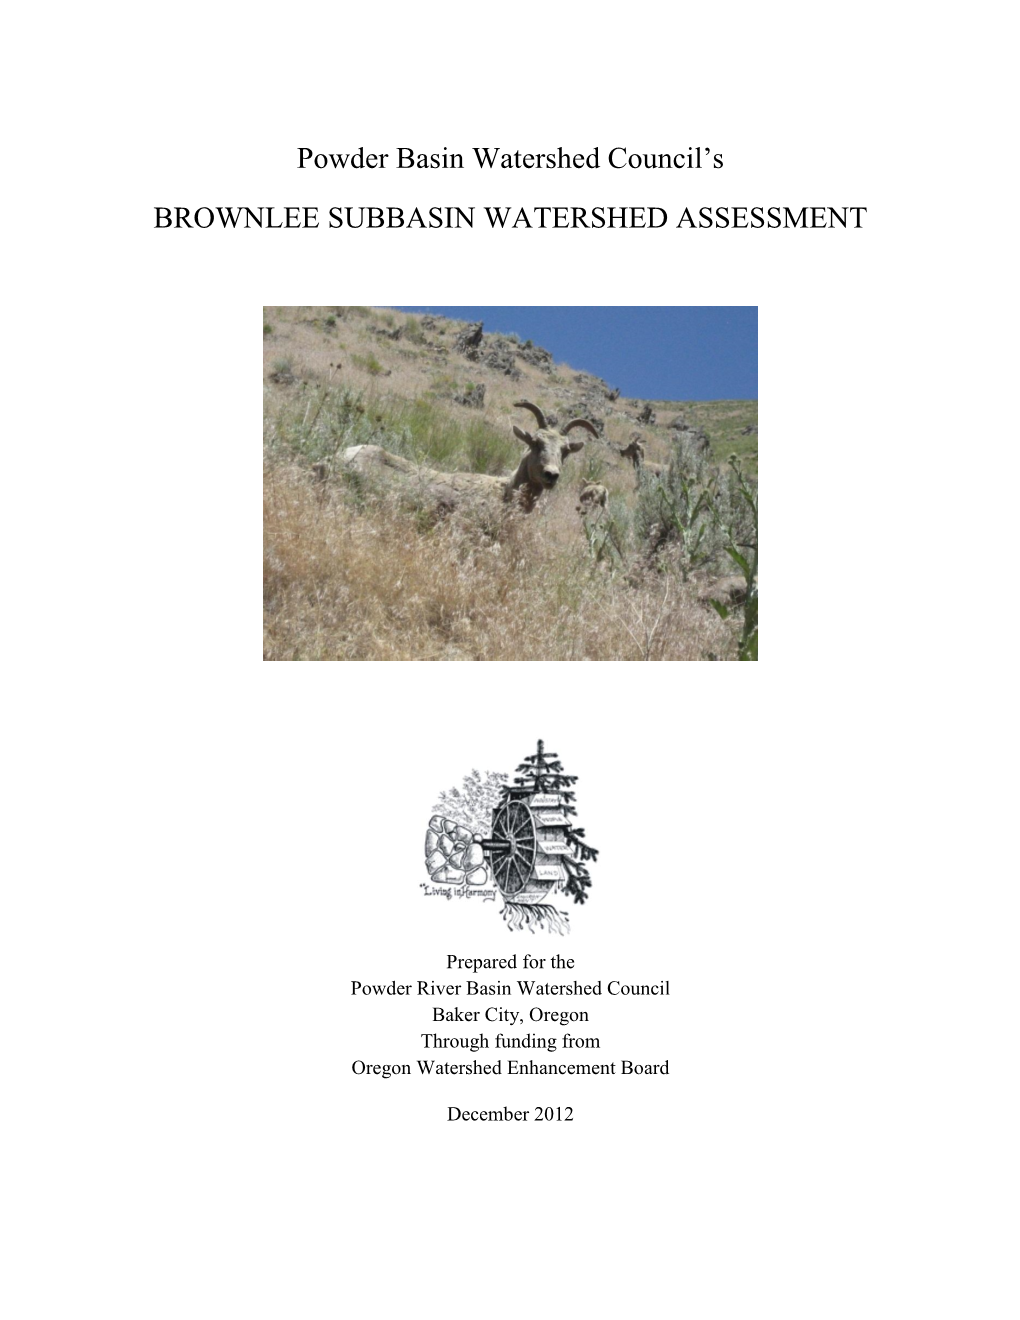 PBWC's Brownlee Subbasin Watershed Assessment